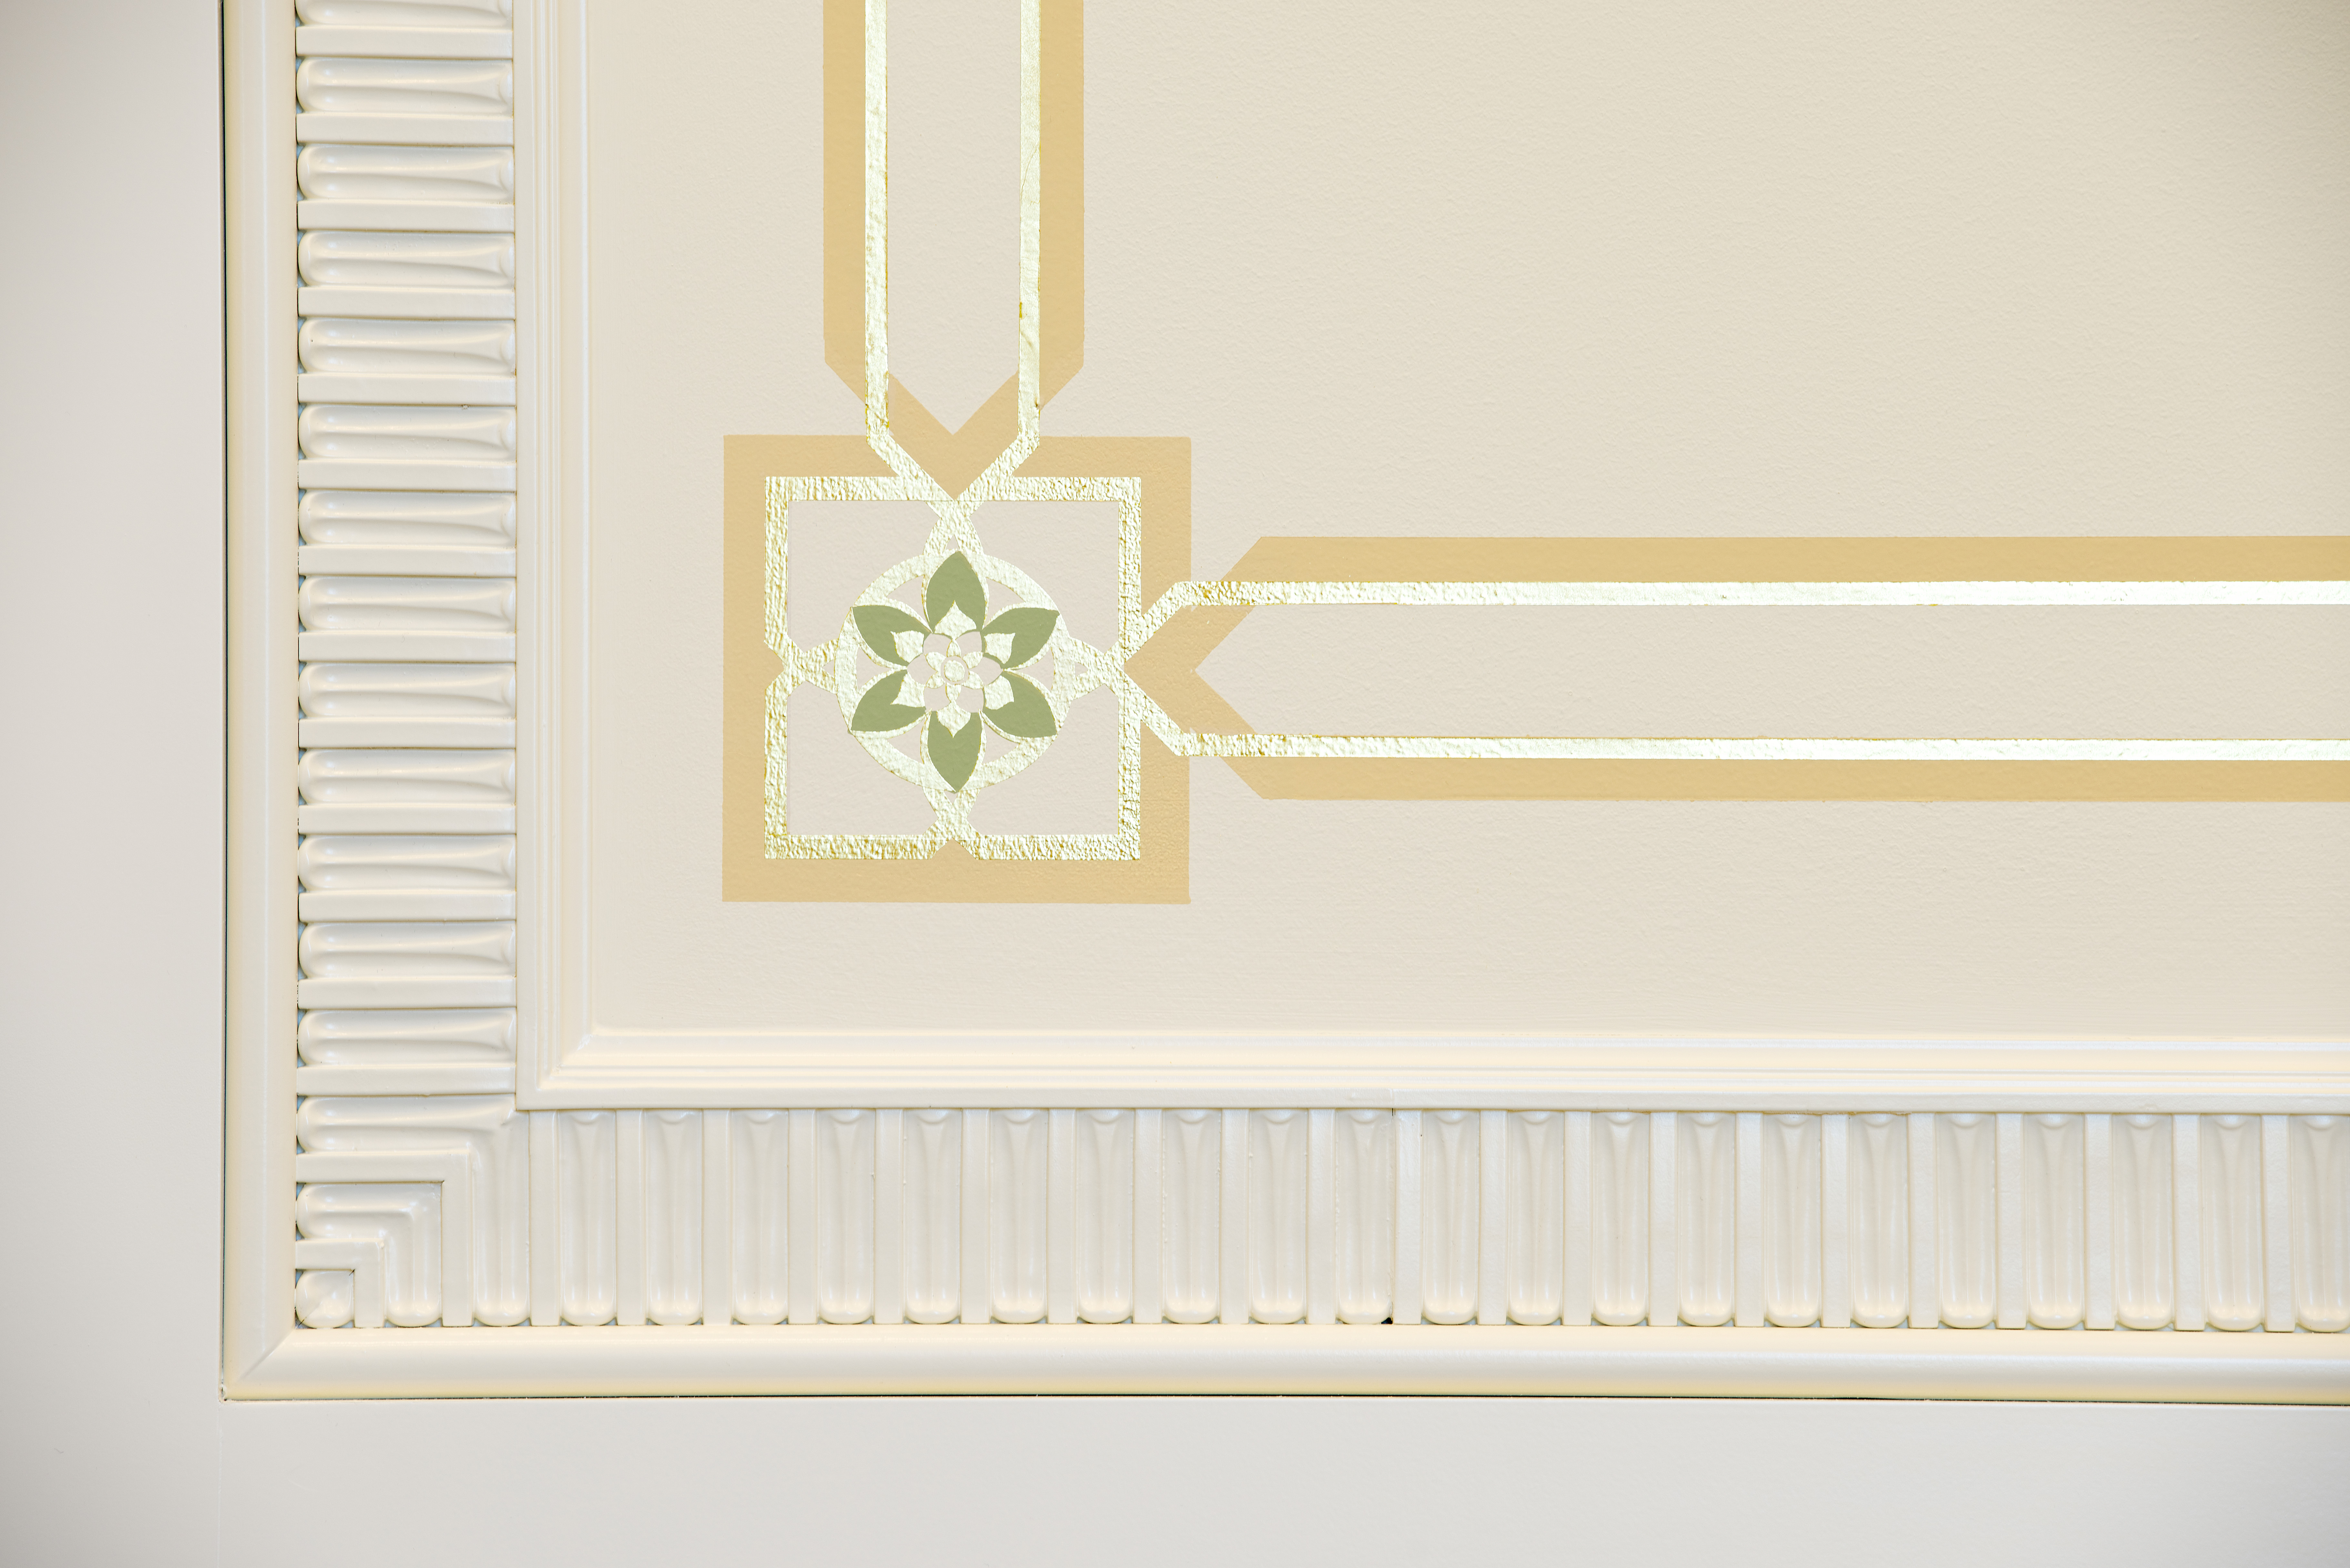 Indianapolis_Temple_Wall_Detail_2015.jpg